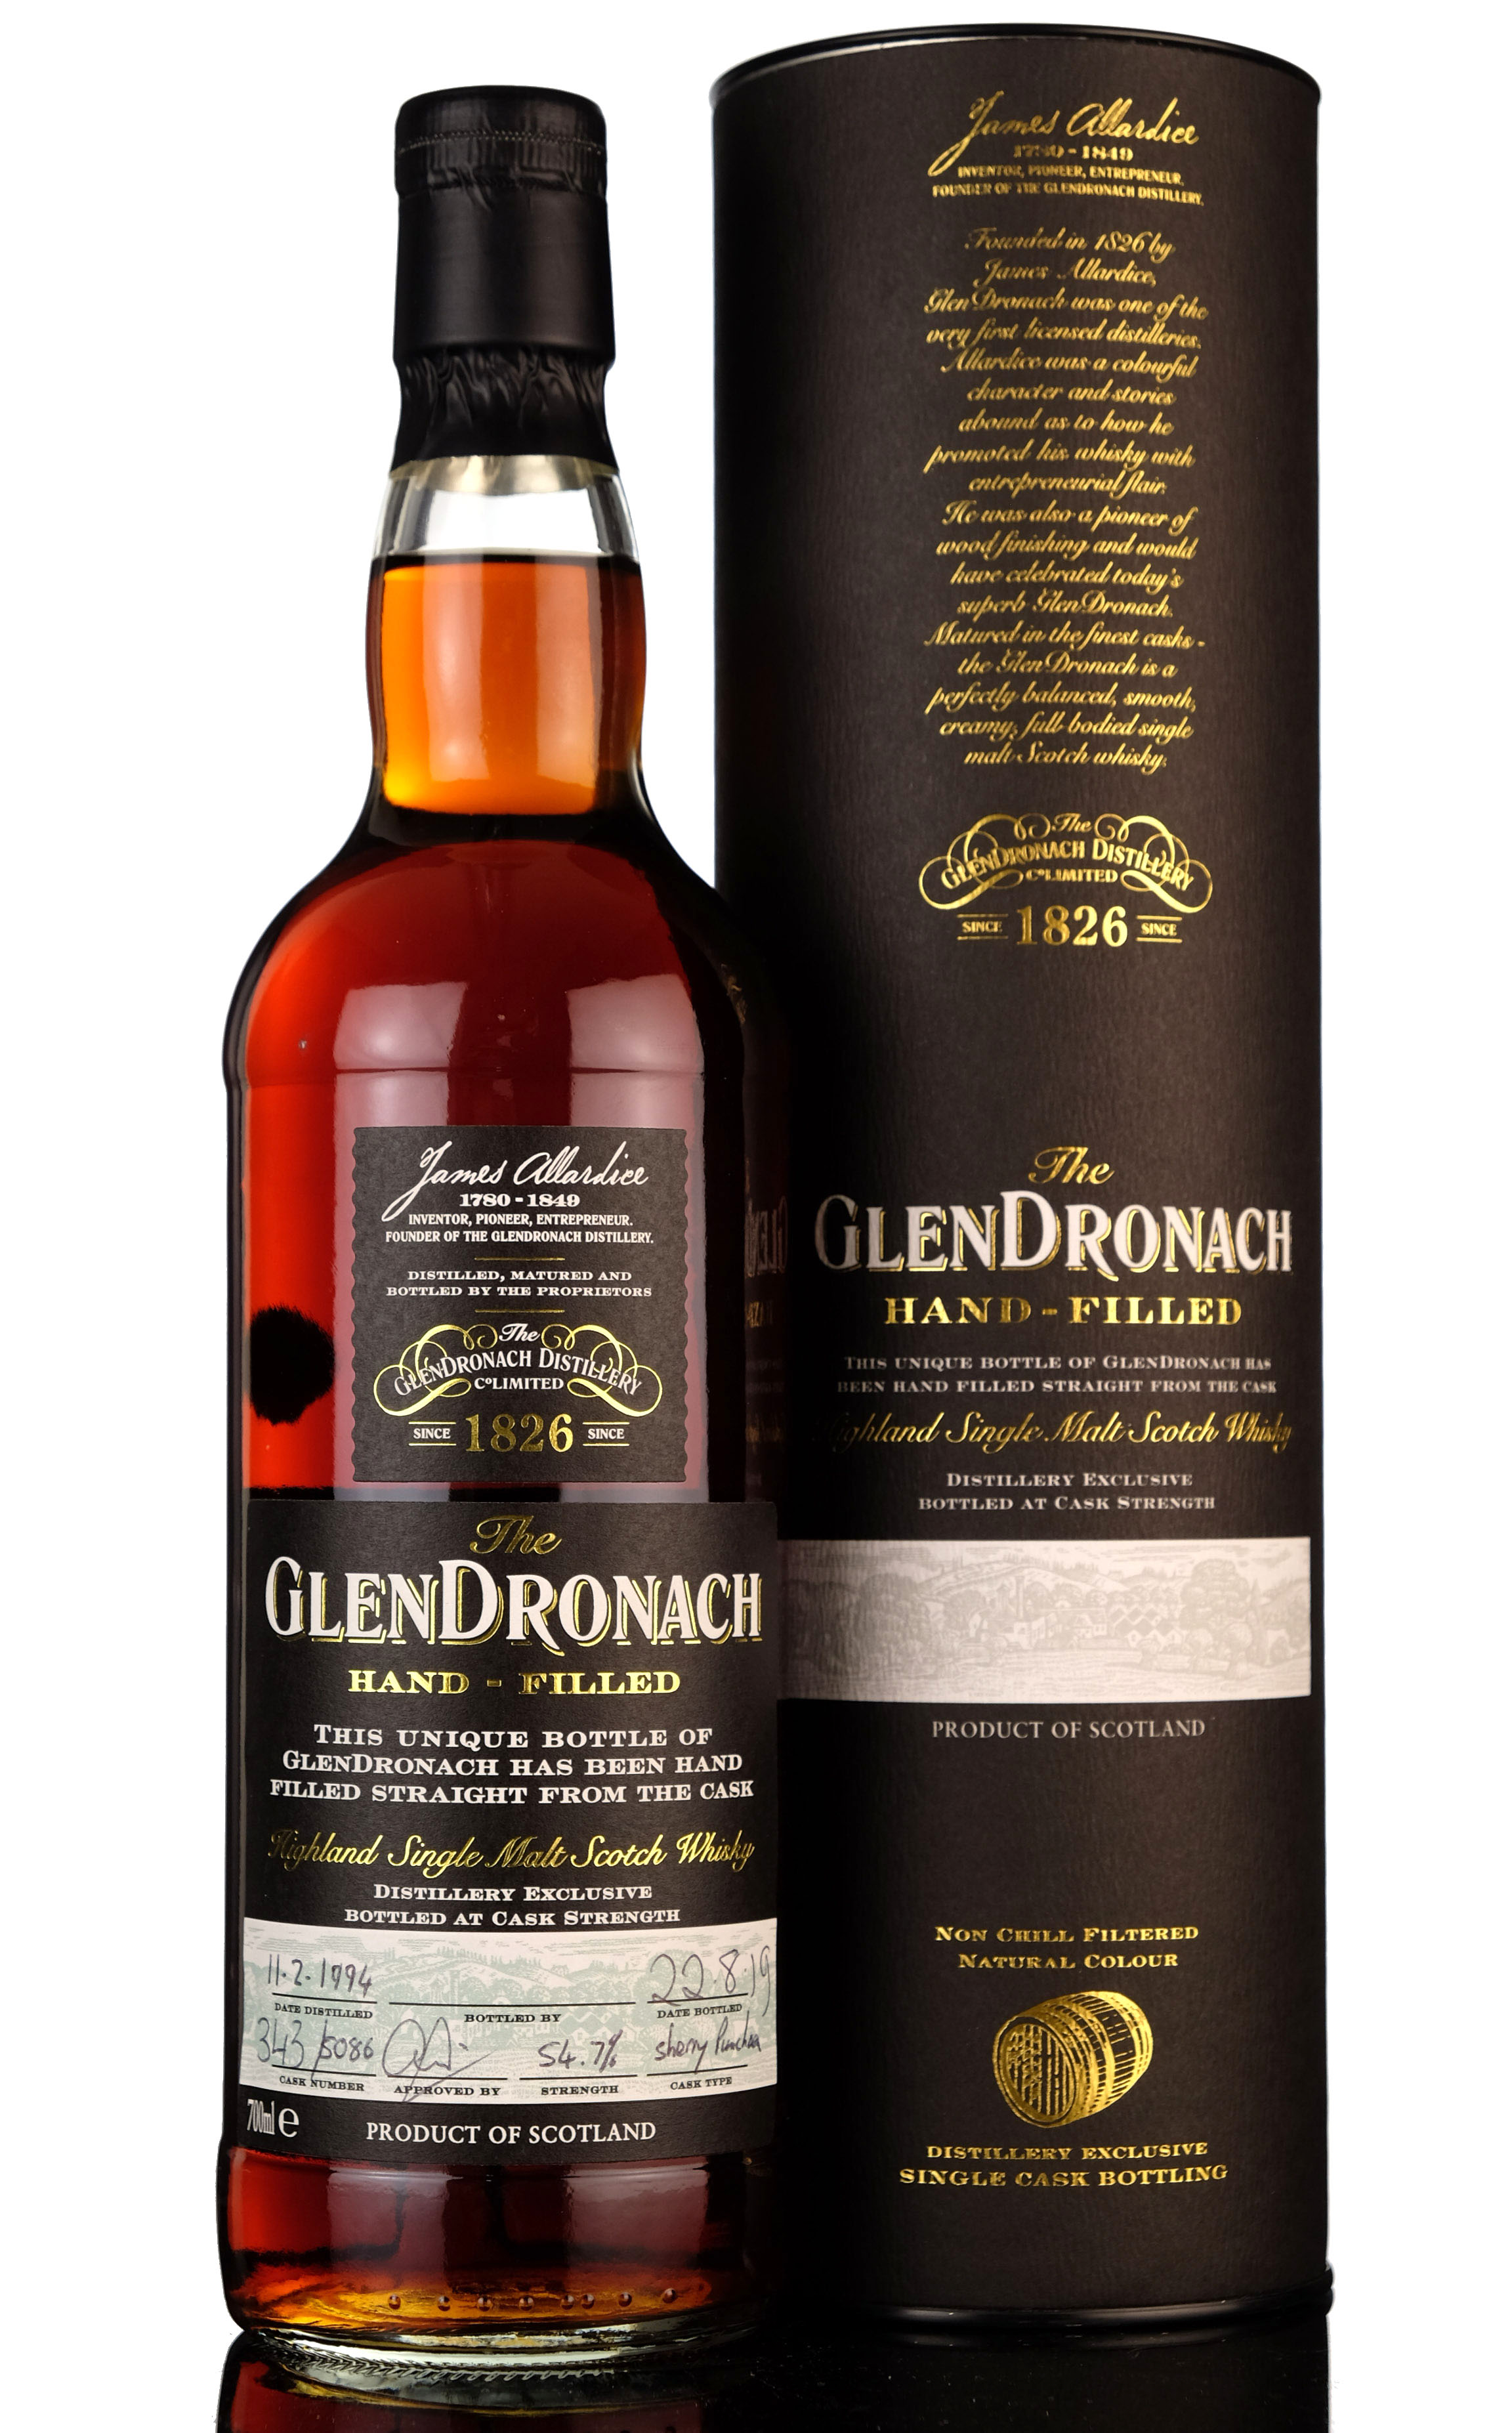 Glendronach 1994-2019 - 25 Year Old - Single Cask 5086 - Hand Filled